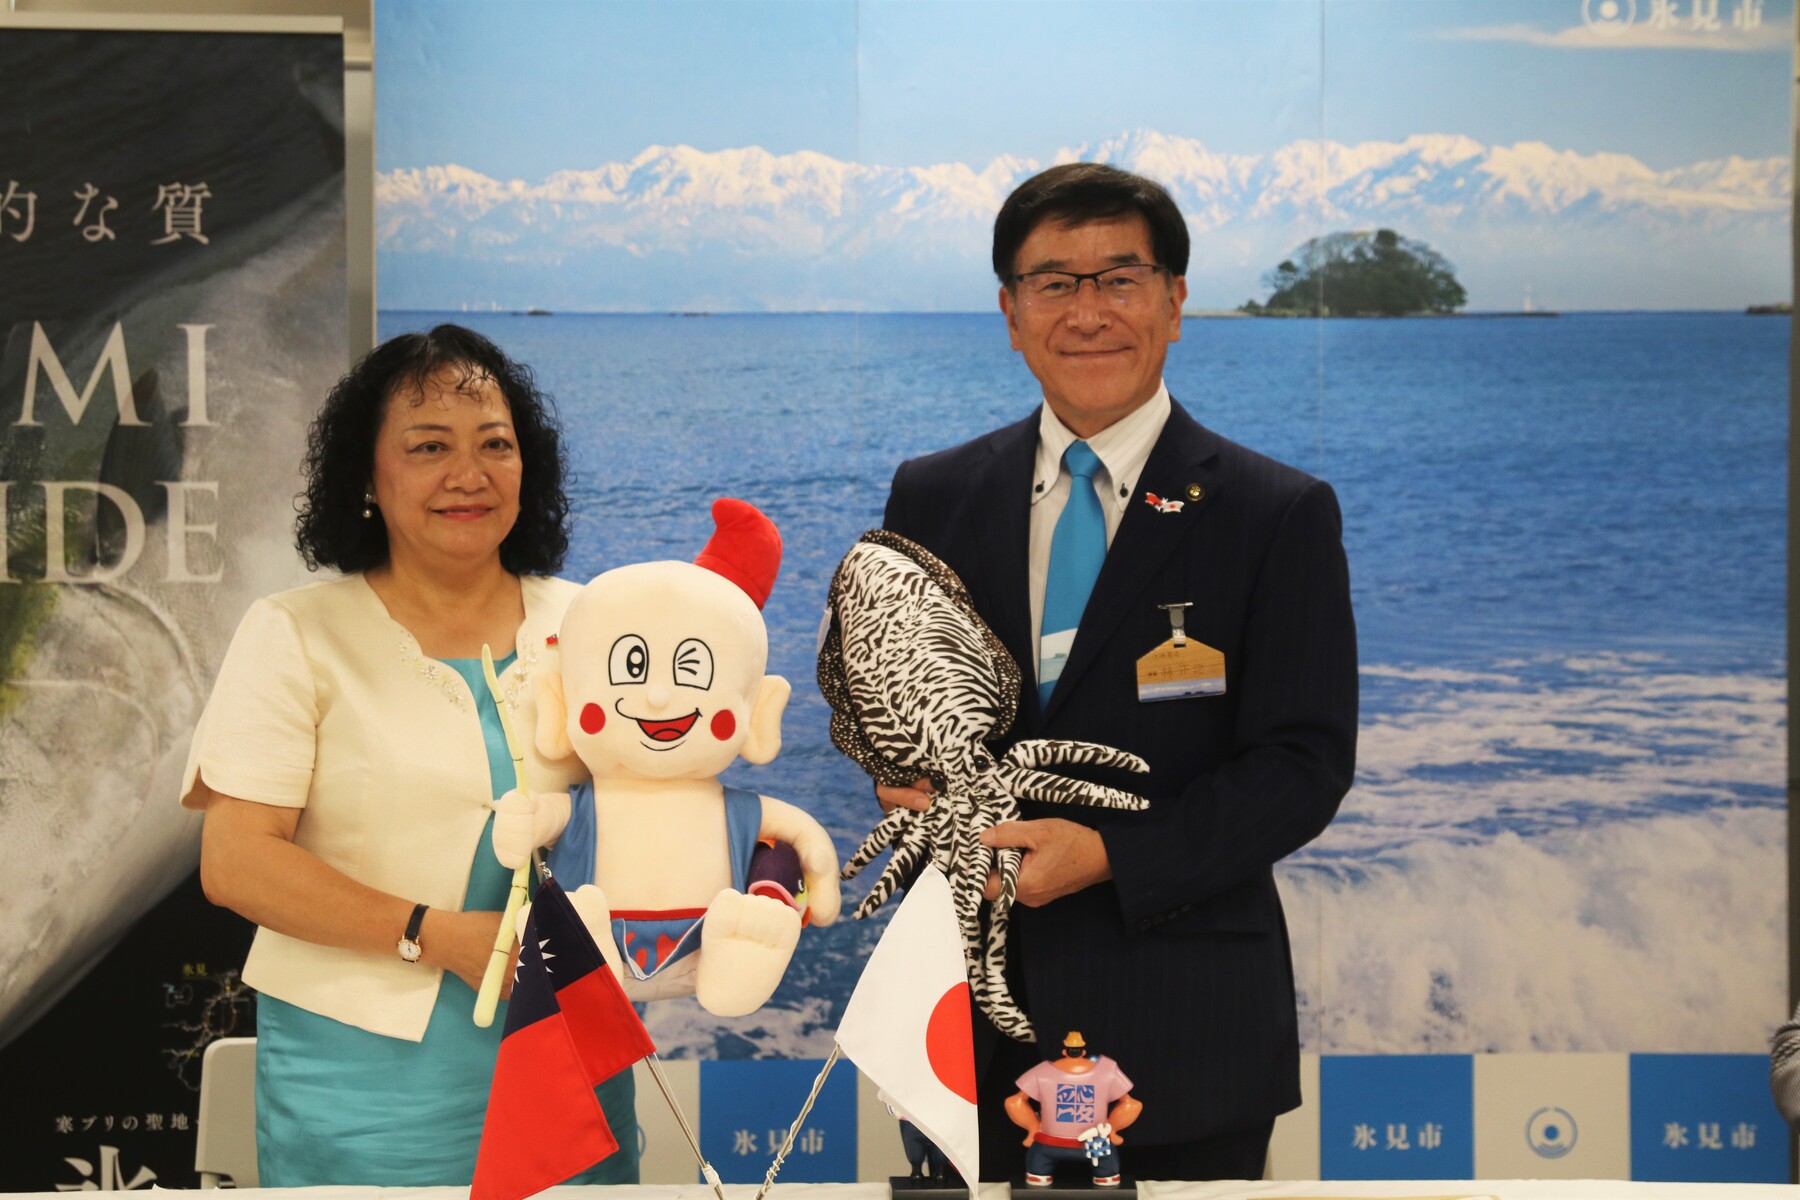 The mayor of Himi City, Masayuki Hayashi, presented the mascots designed by the well-known cartoonist Fujiko Fujio A, and NSYSU Si Wan College gave back the dolls of "Tiger-striped Squid" and "Worker and Fisherwoman" to show the value of Kaohsiung's industry and labor.